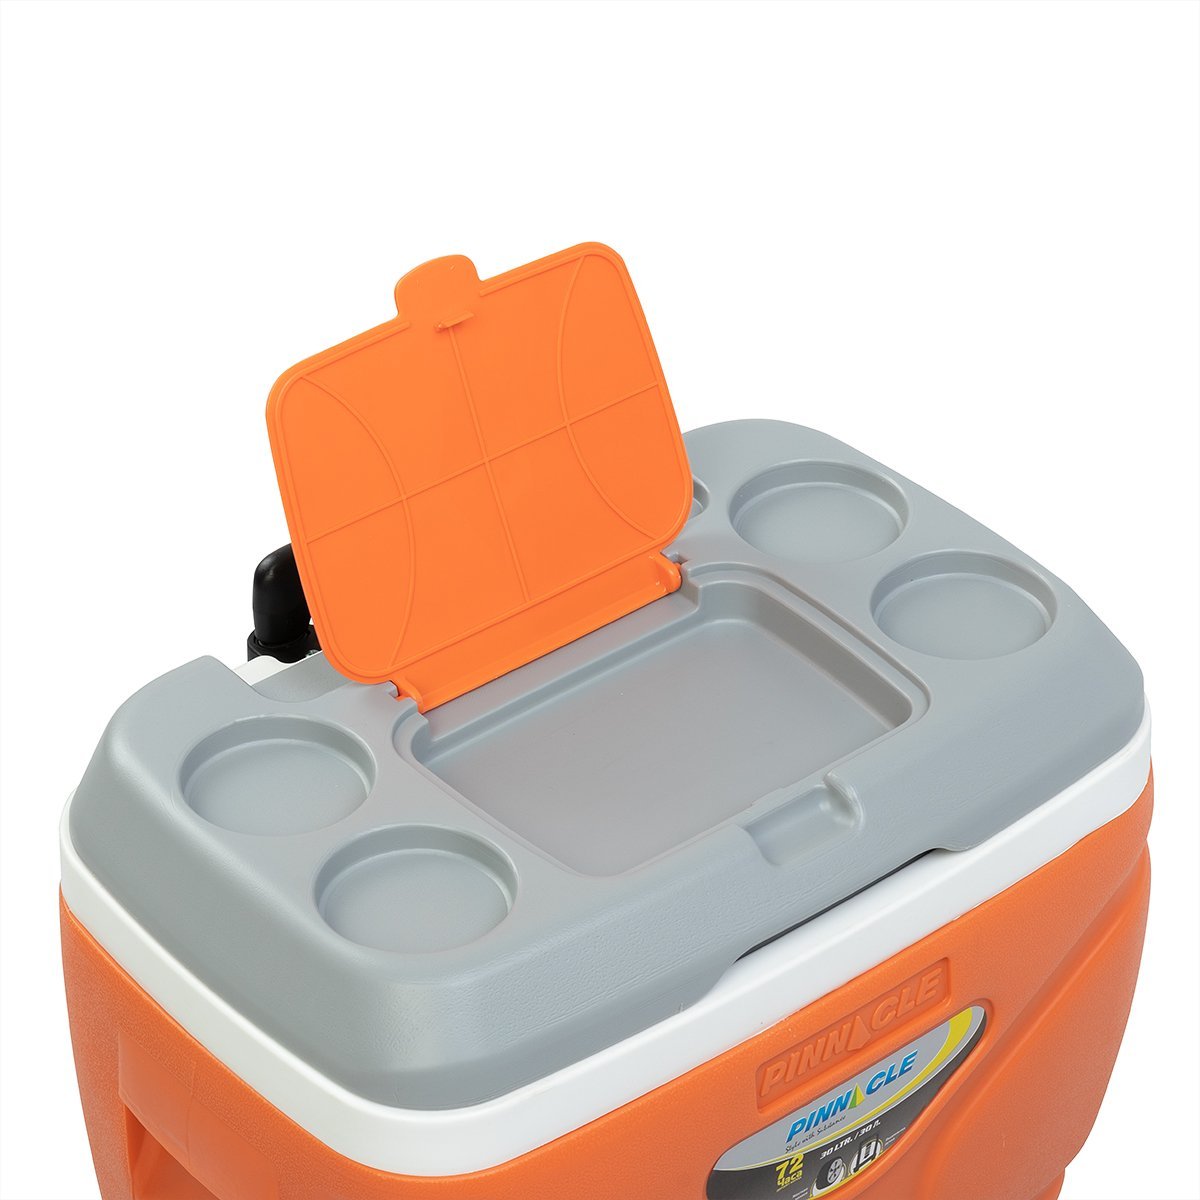 Prudence Large Wheeling Ice Chest's lid features 4 glass holders and one small extra storage compartment